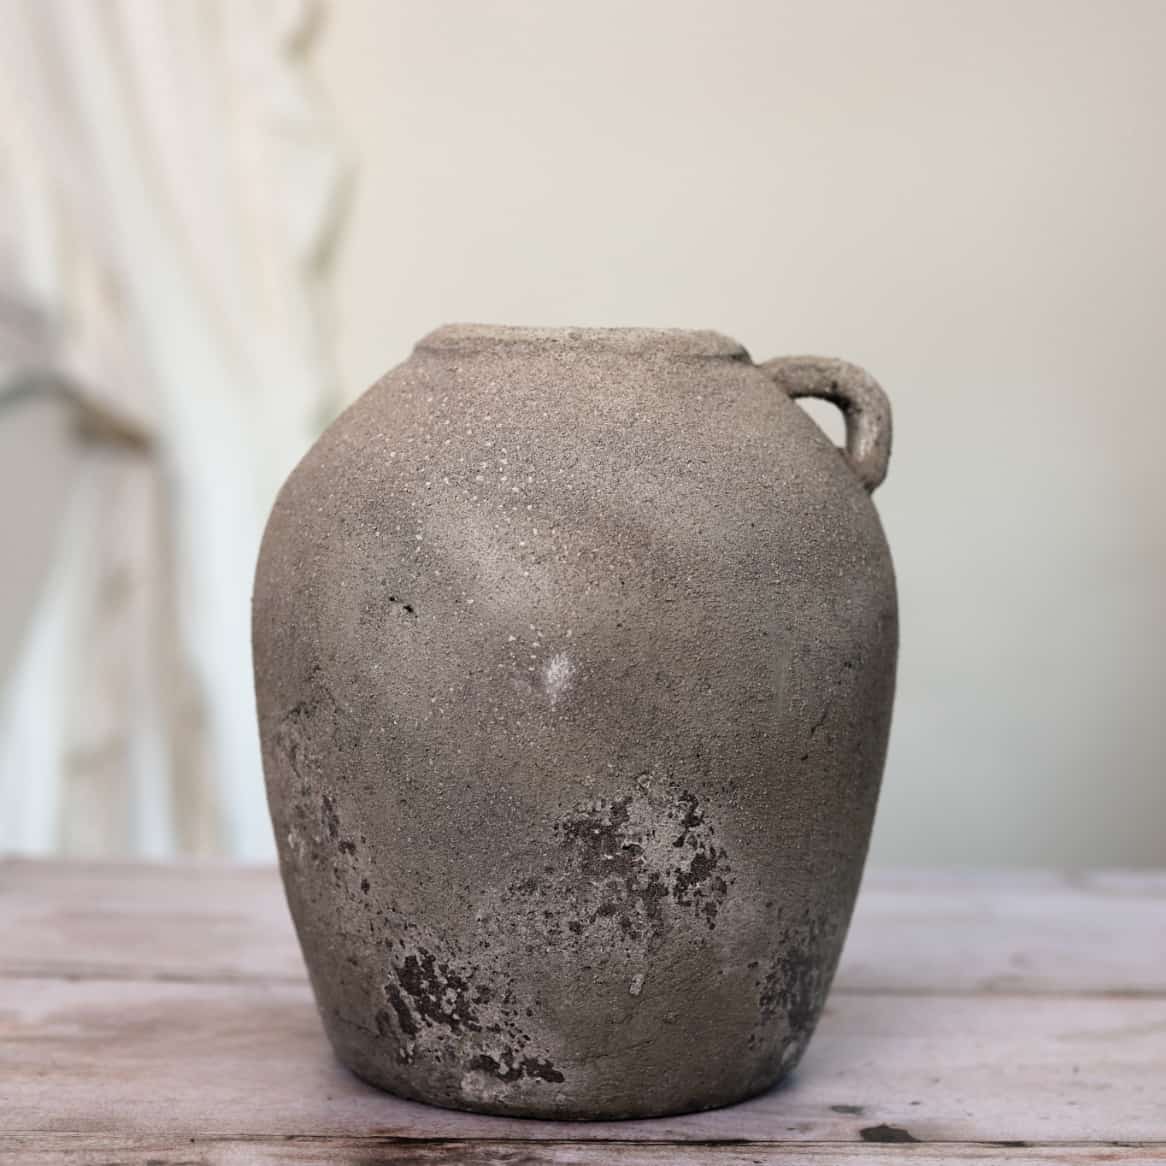 Distressed grey vase with small handle at the top on wooden surface.